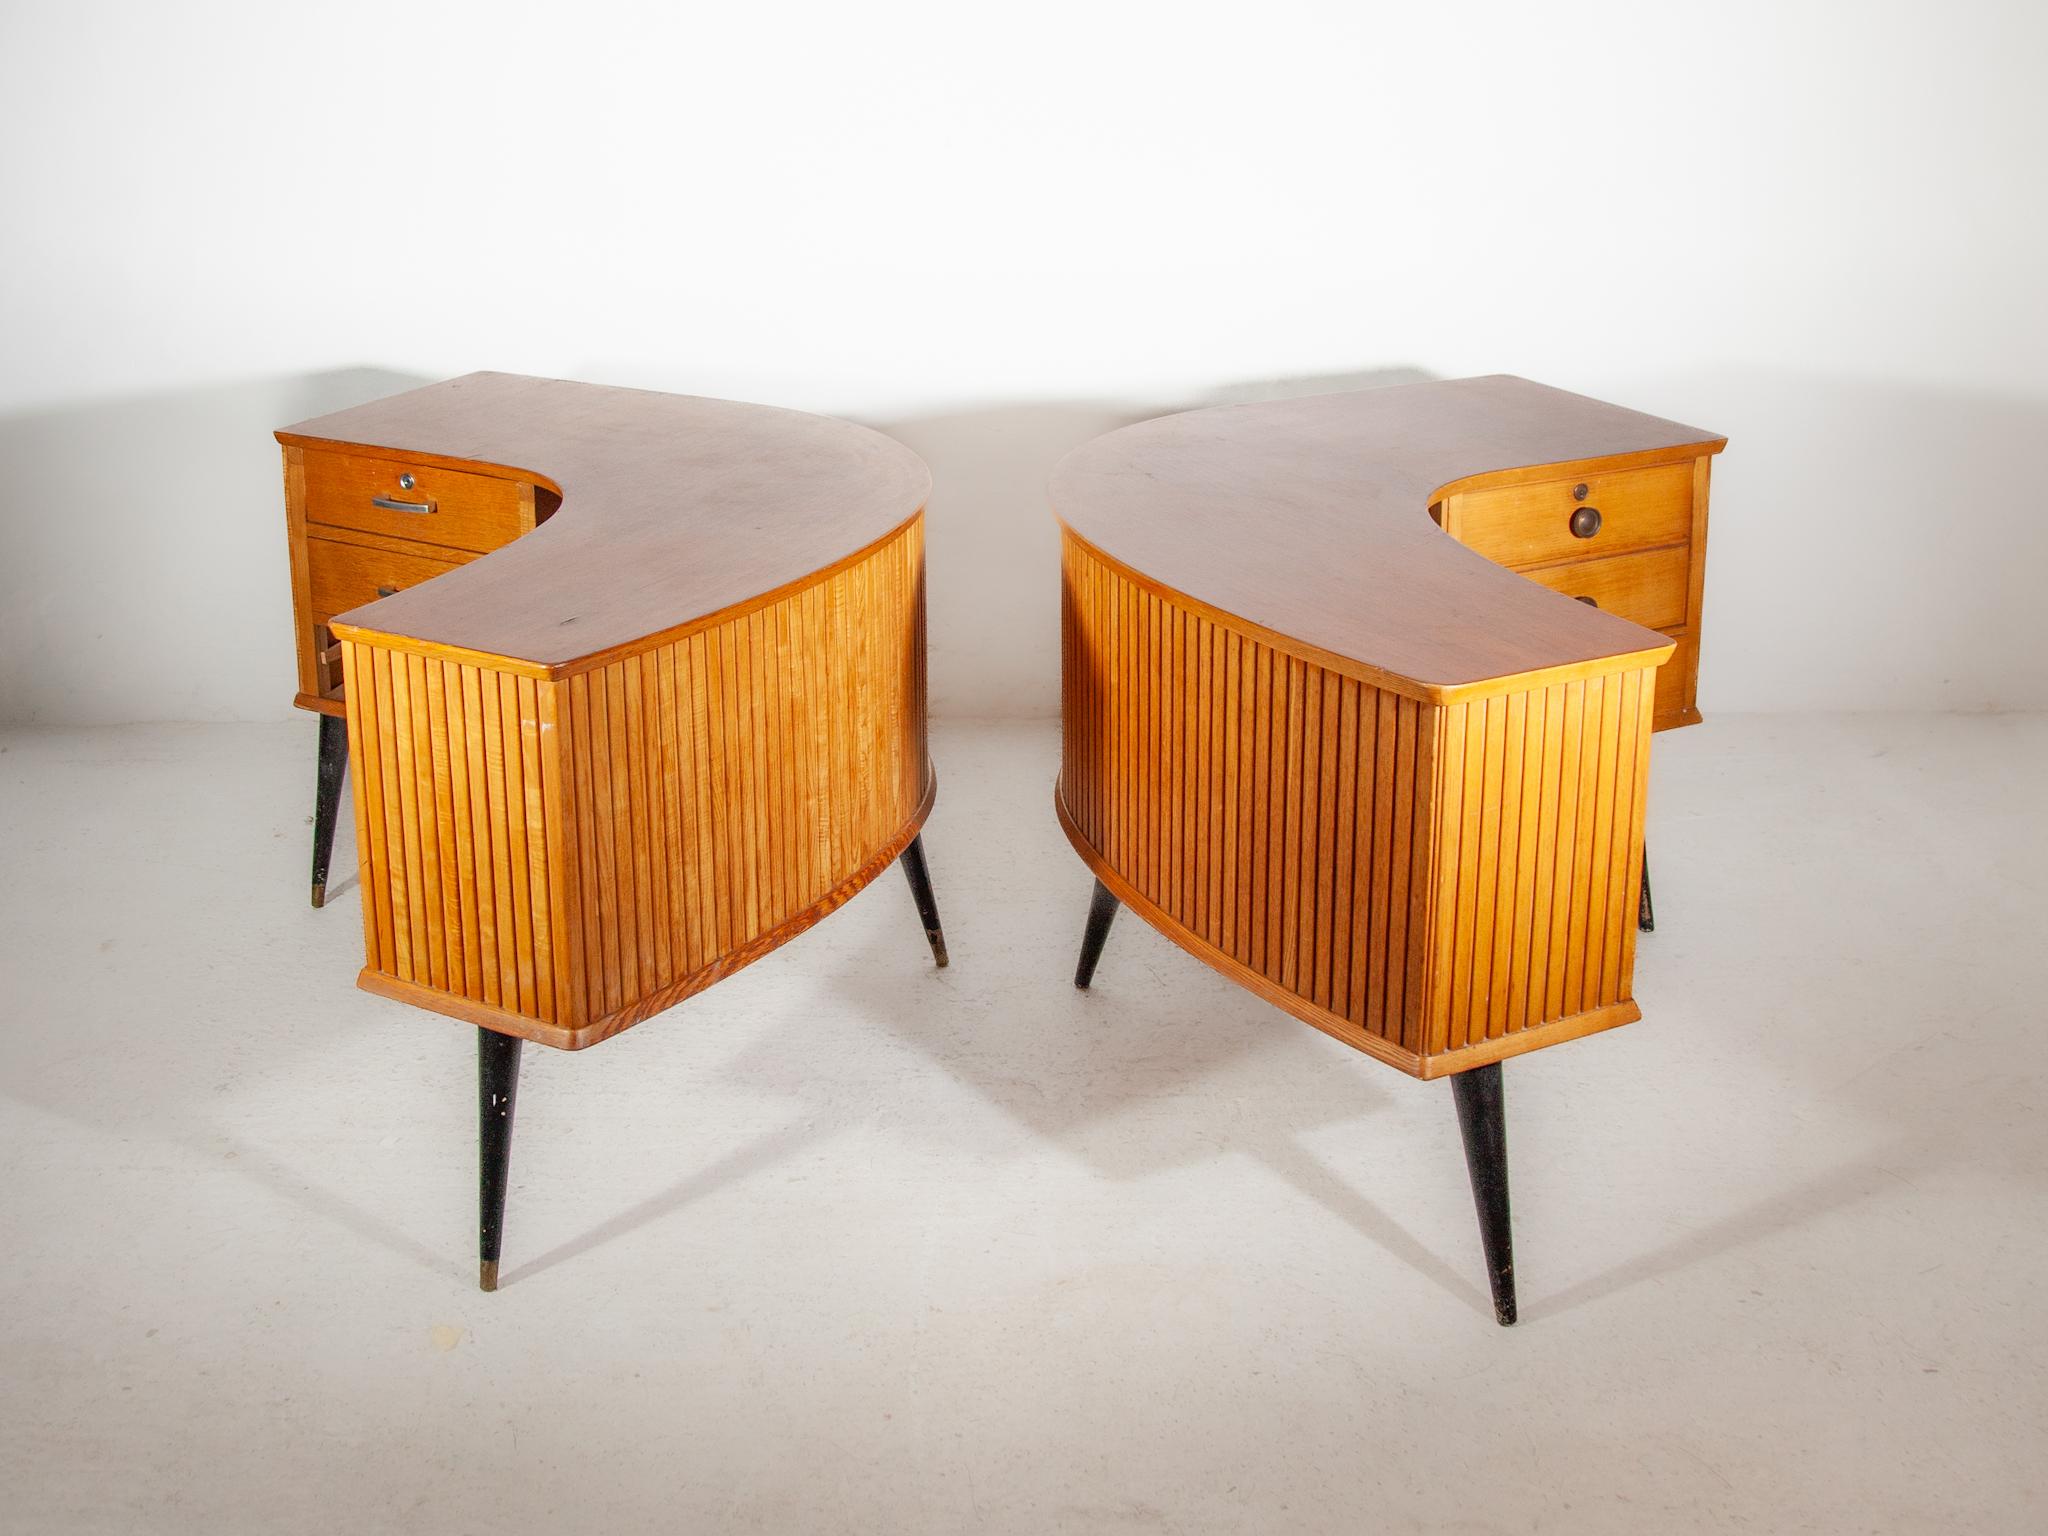 Boomerang Shaped Desk, Shop Counter, 1950s by Alfred Hendrickx For Sale 10